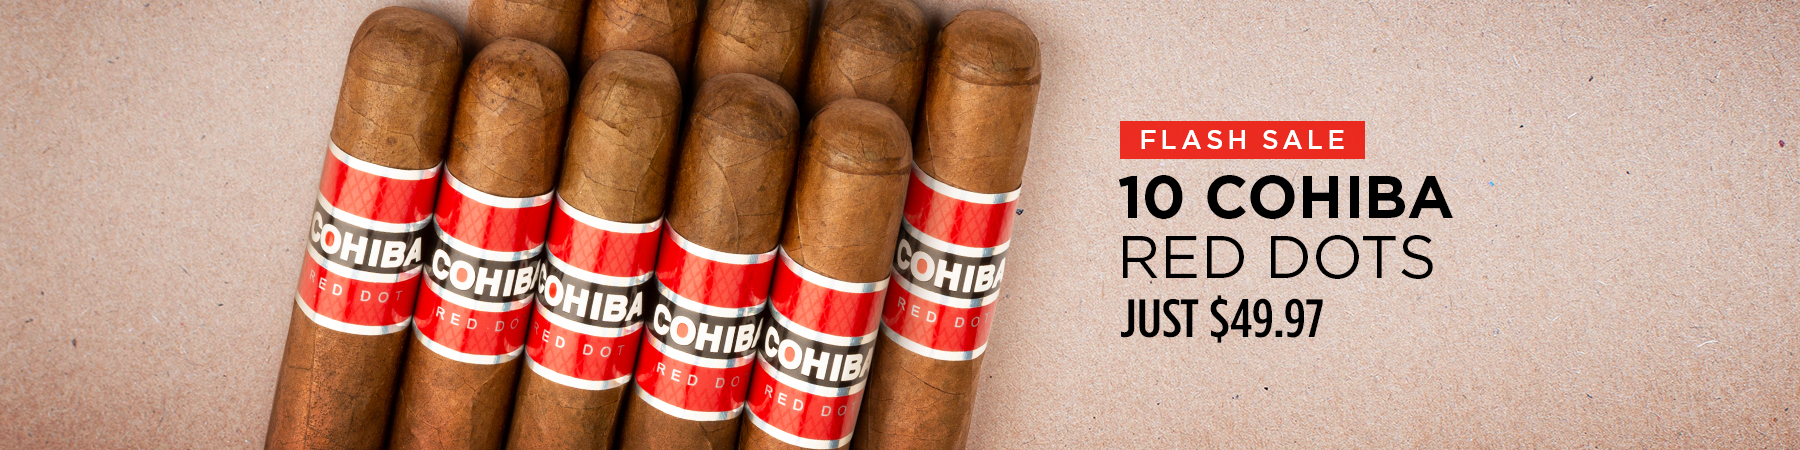 10 Cohiba Red Dots Just $49.97